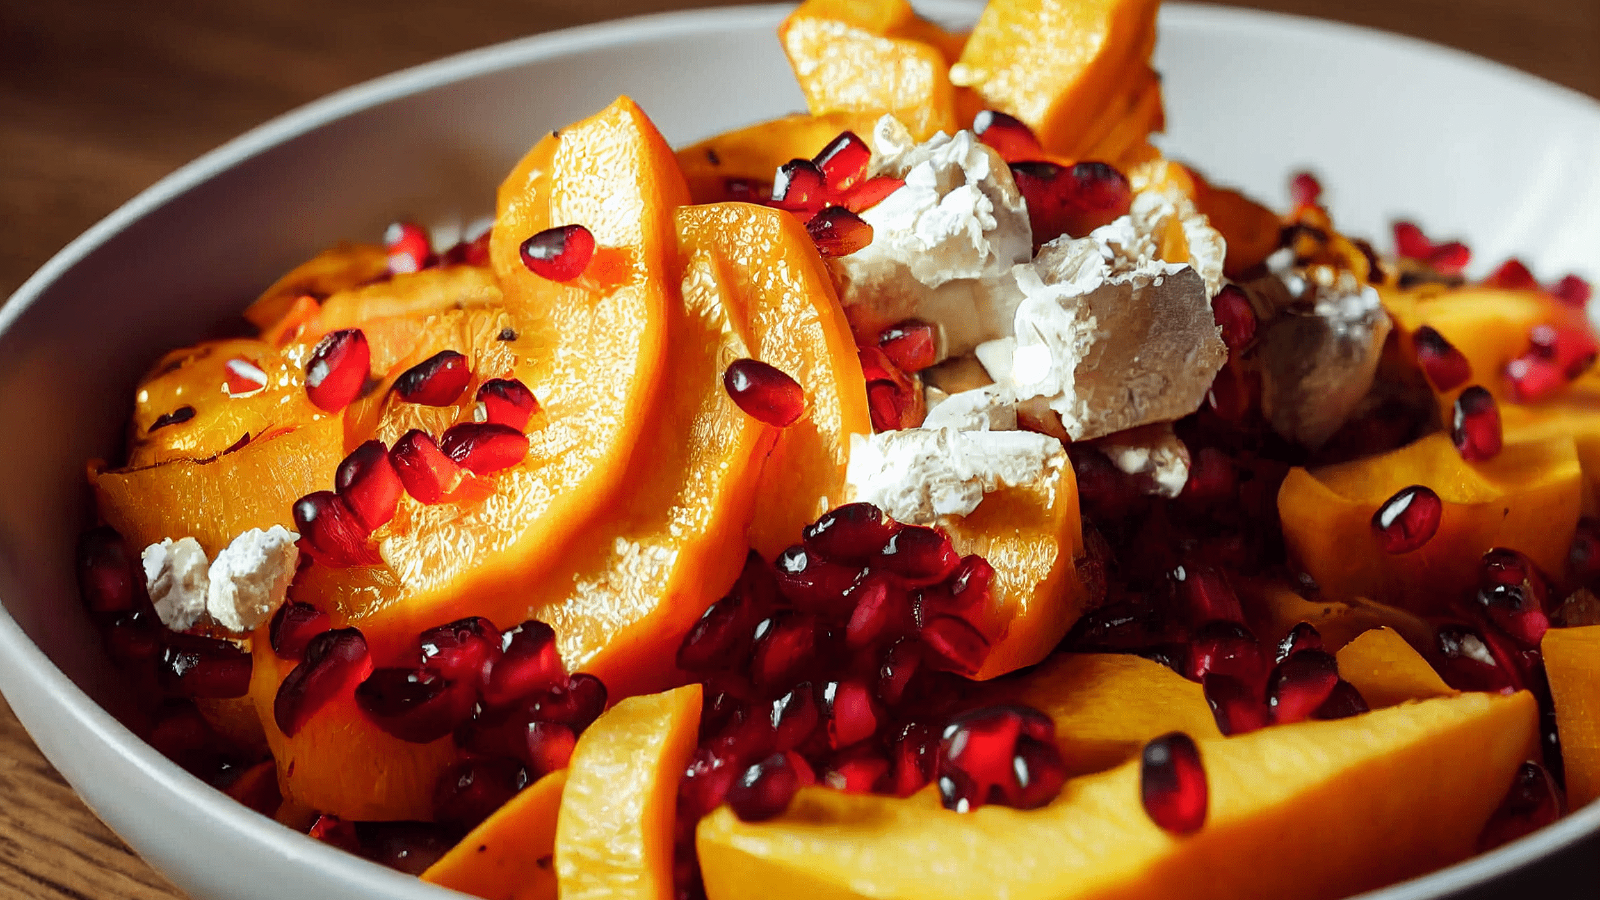 Image of Delicata Squash with Goat Cheese and Pomegranate Seeds